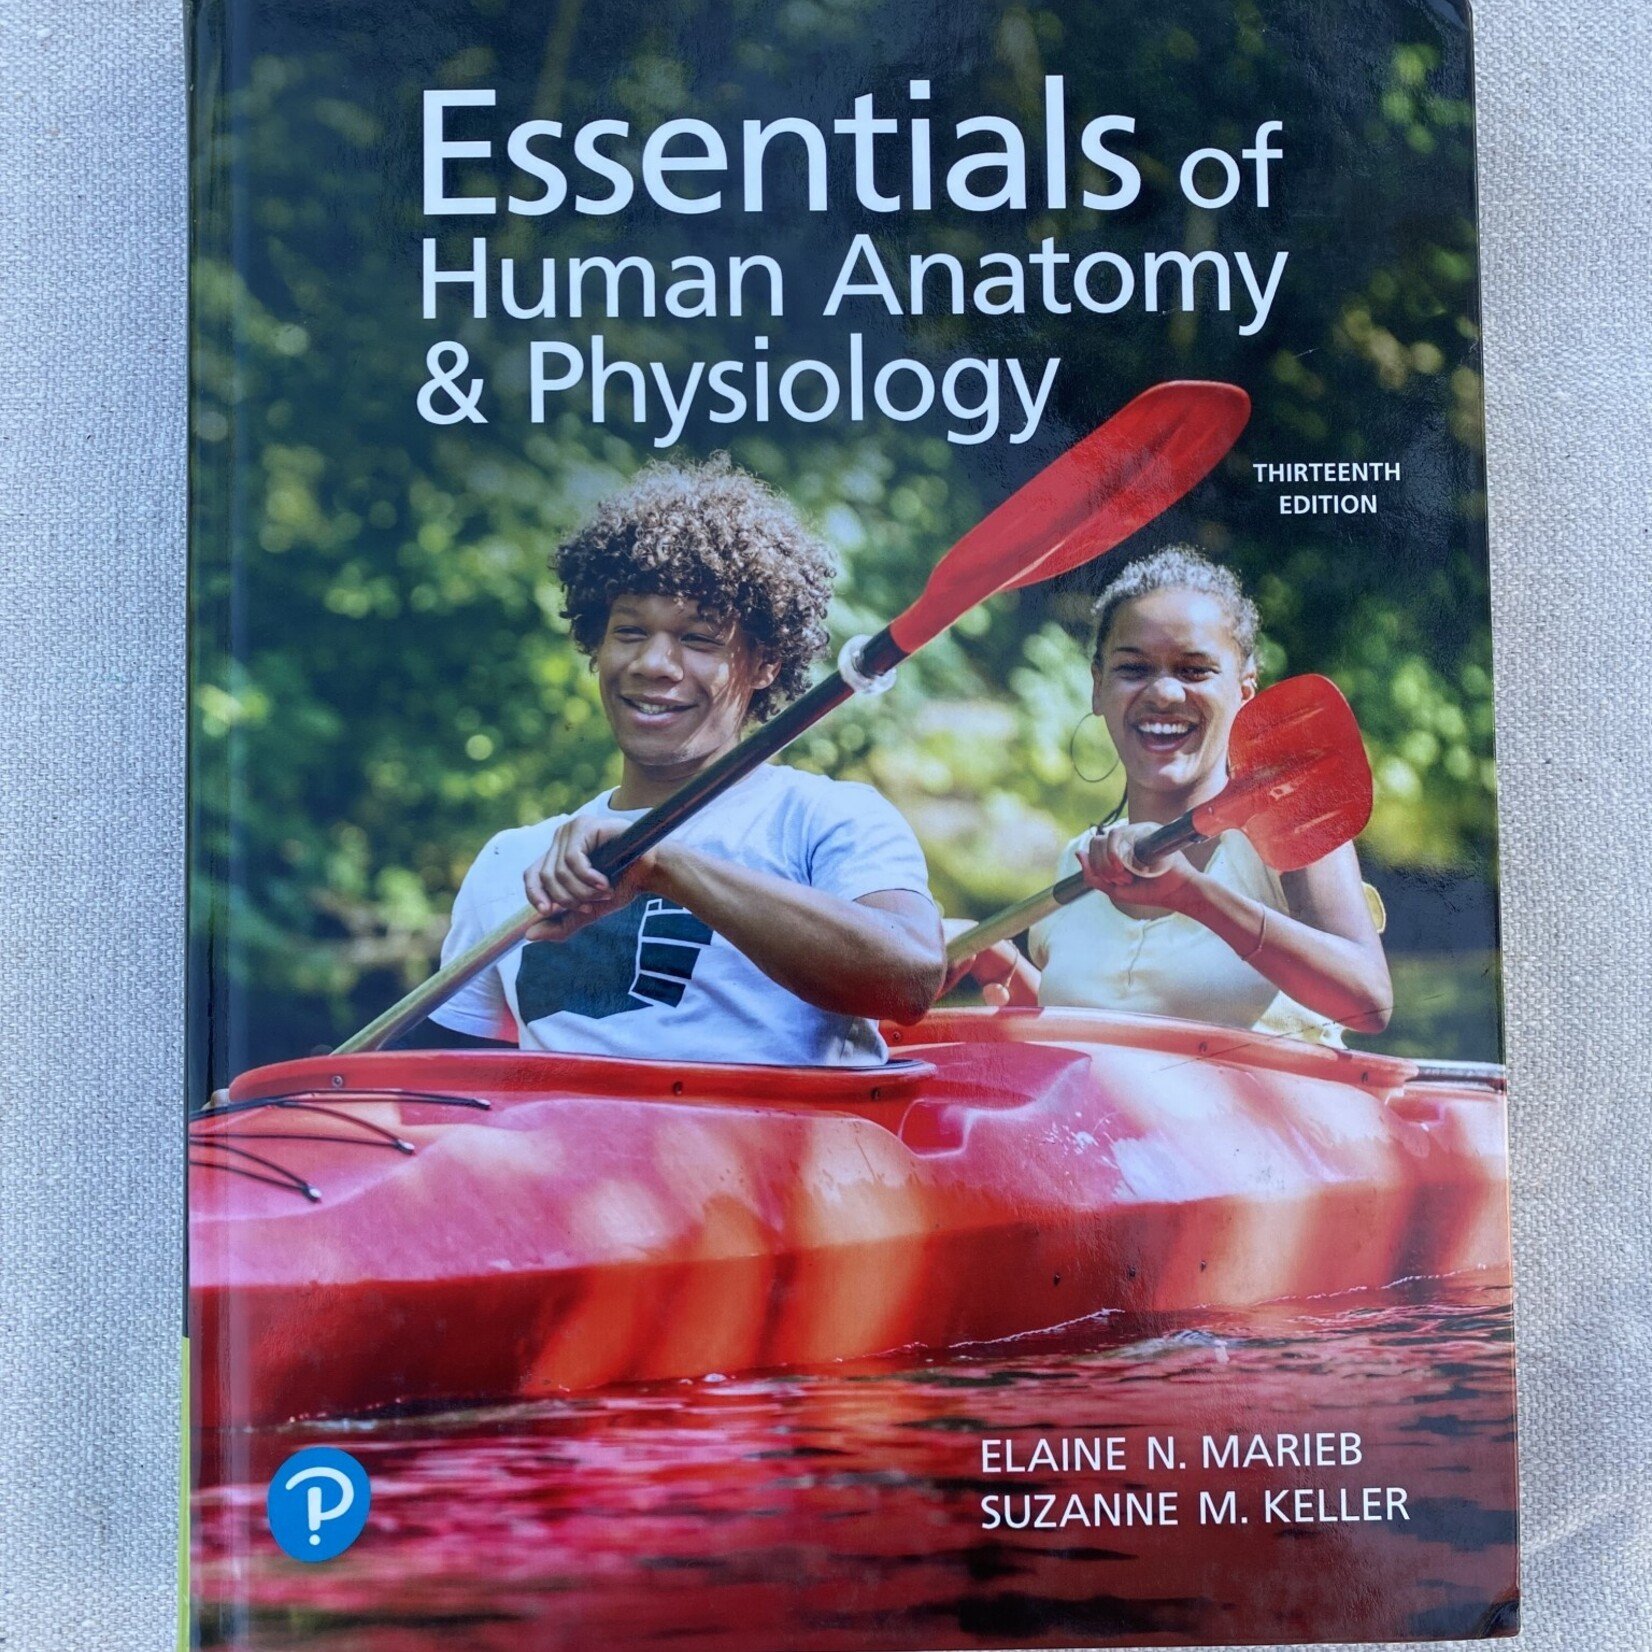 Essentials of Human Anatomy & Physiology 13th Ed NEW w/ eTEXT